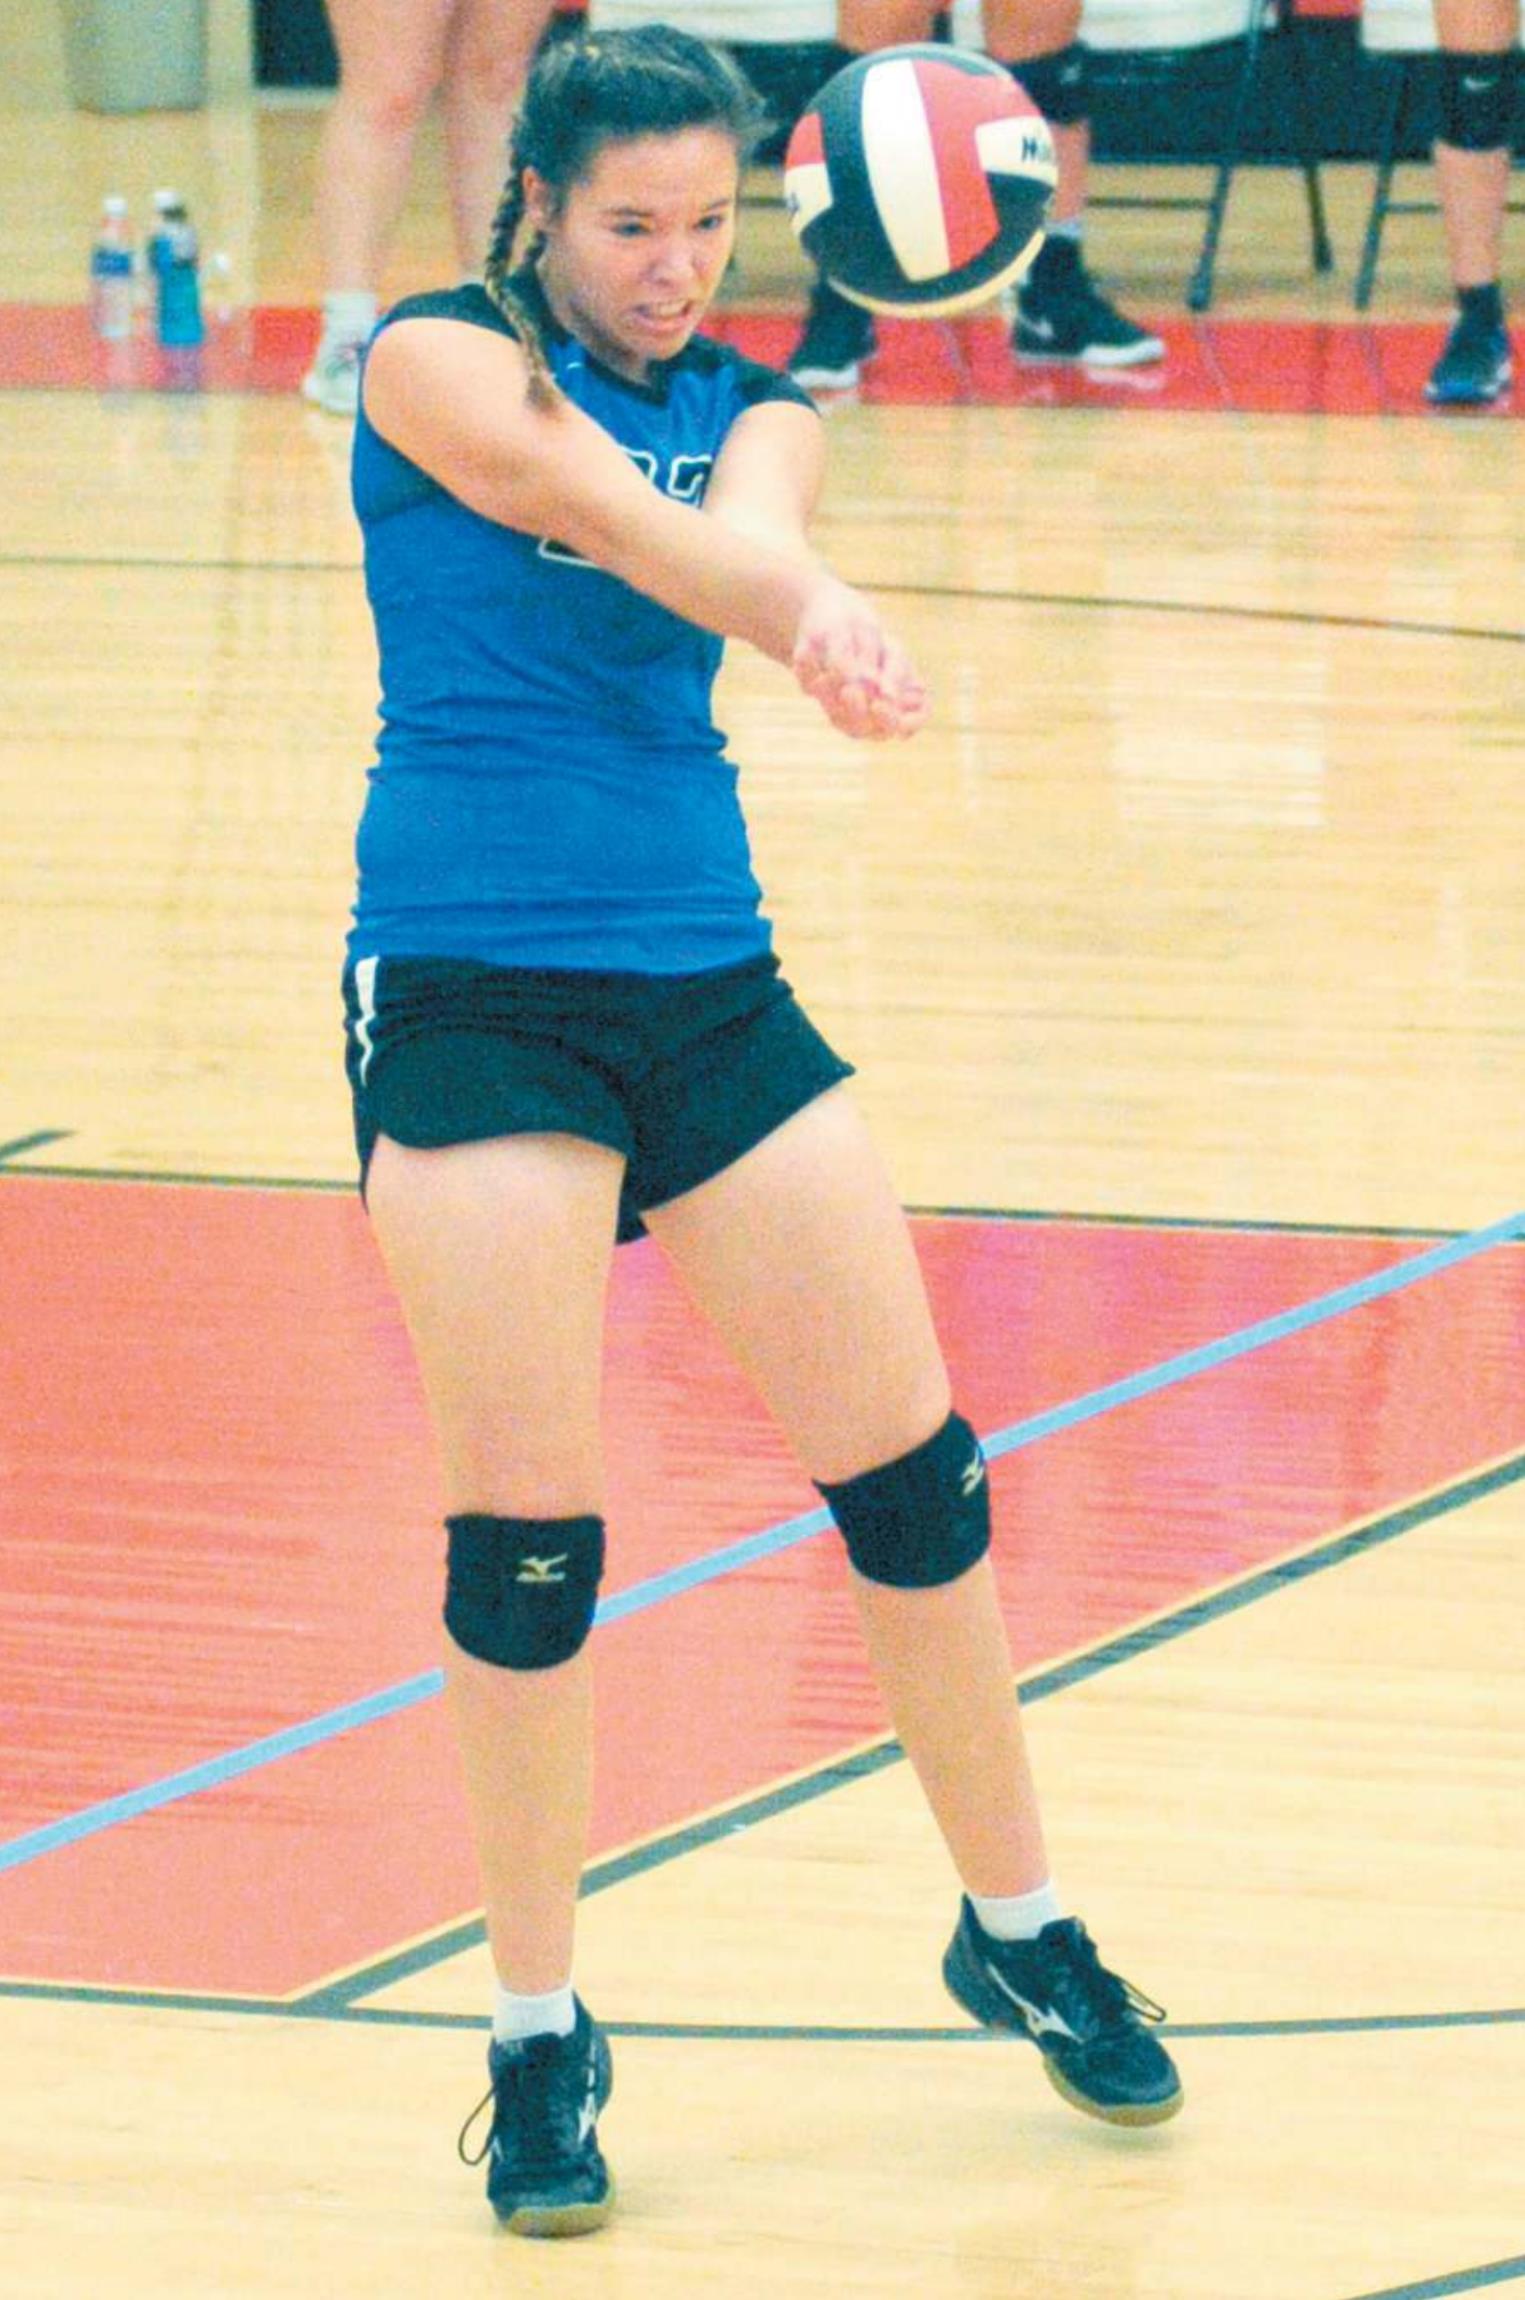 Gabby Clayton focuses on the ball in an attempt to return a serve during Corn Bible’s match against North Rock Creek last week. Josh Burton/WDN